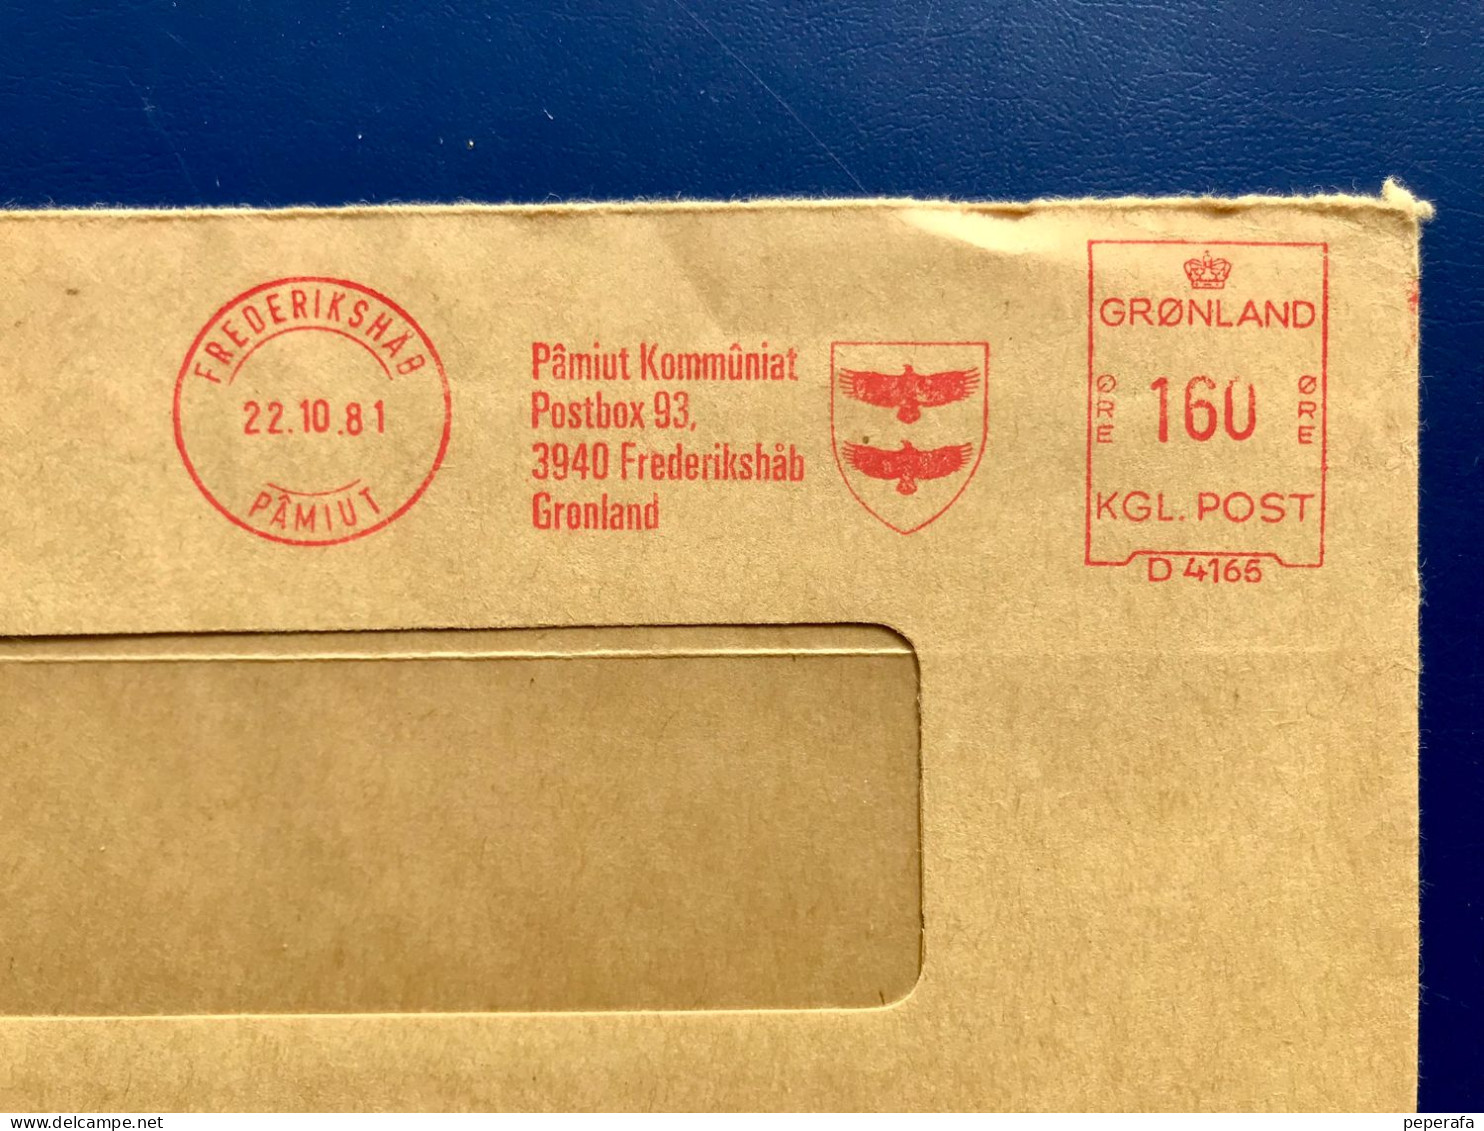 Denmark, Greenland GRØNLAND, 2 COVER POSTAGE METER, FRANQUEO MECÁNICO (FRANCOFILIA 1) - Marcophilie